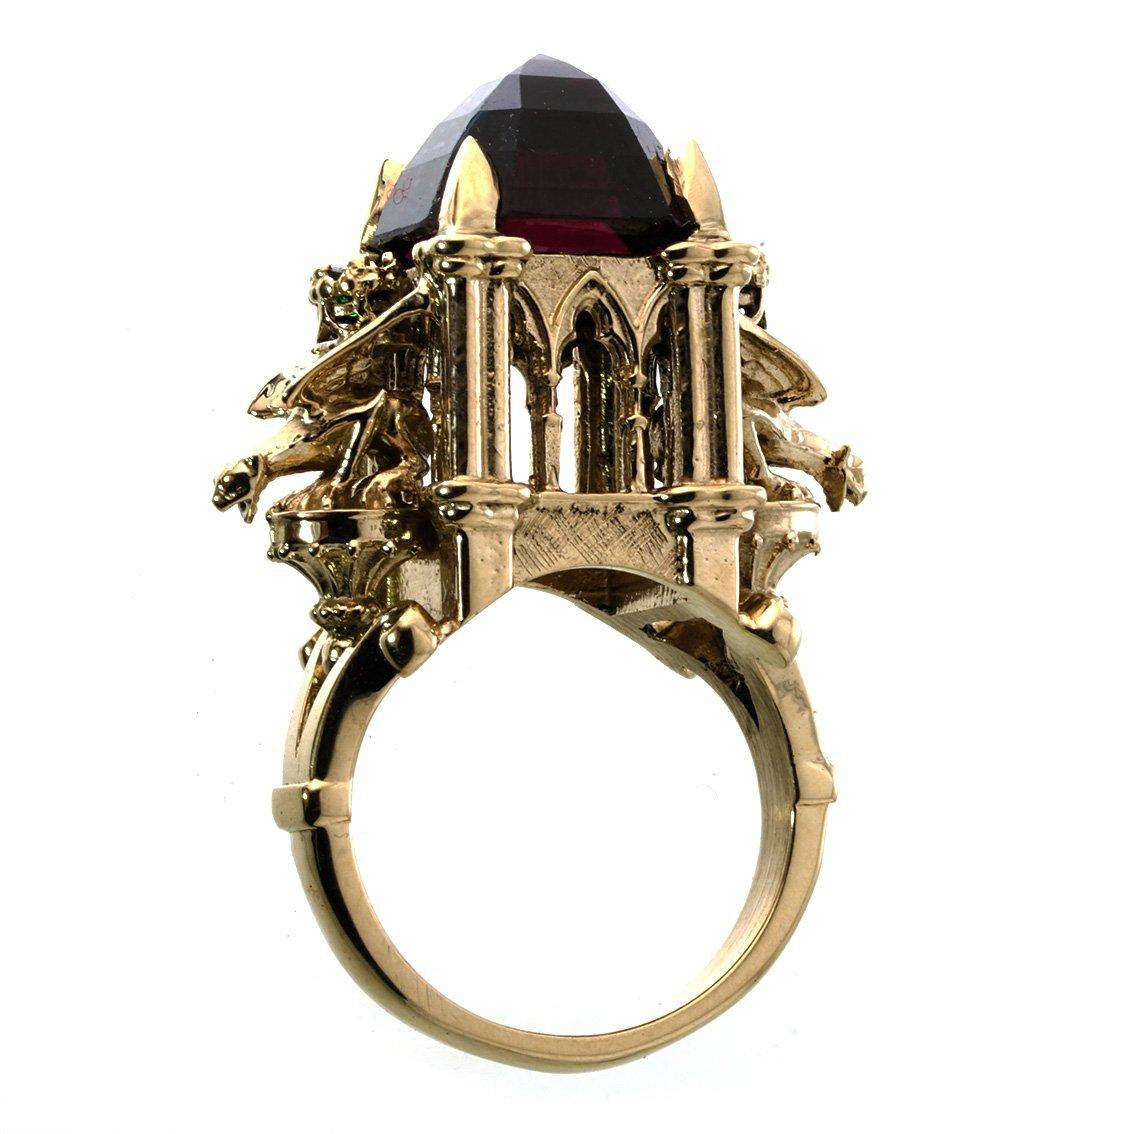 The Beguiled Mortal Ring is an exquisite treasure. This beguiling adornment is one of a kind and fits a size L 1/2.

Handcrafted in 9ct yellow gold, the ring features a 12mm x 12mm, rhodolite garnet. This stunning garnet radiates vibrant flashes of